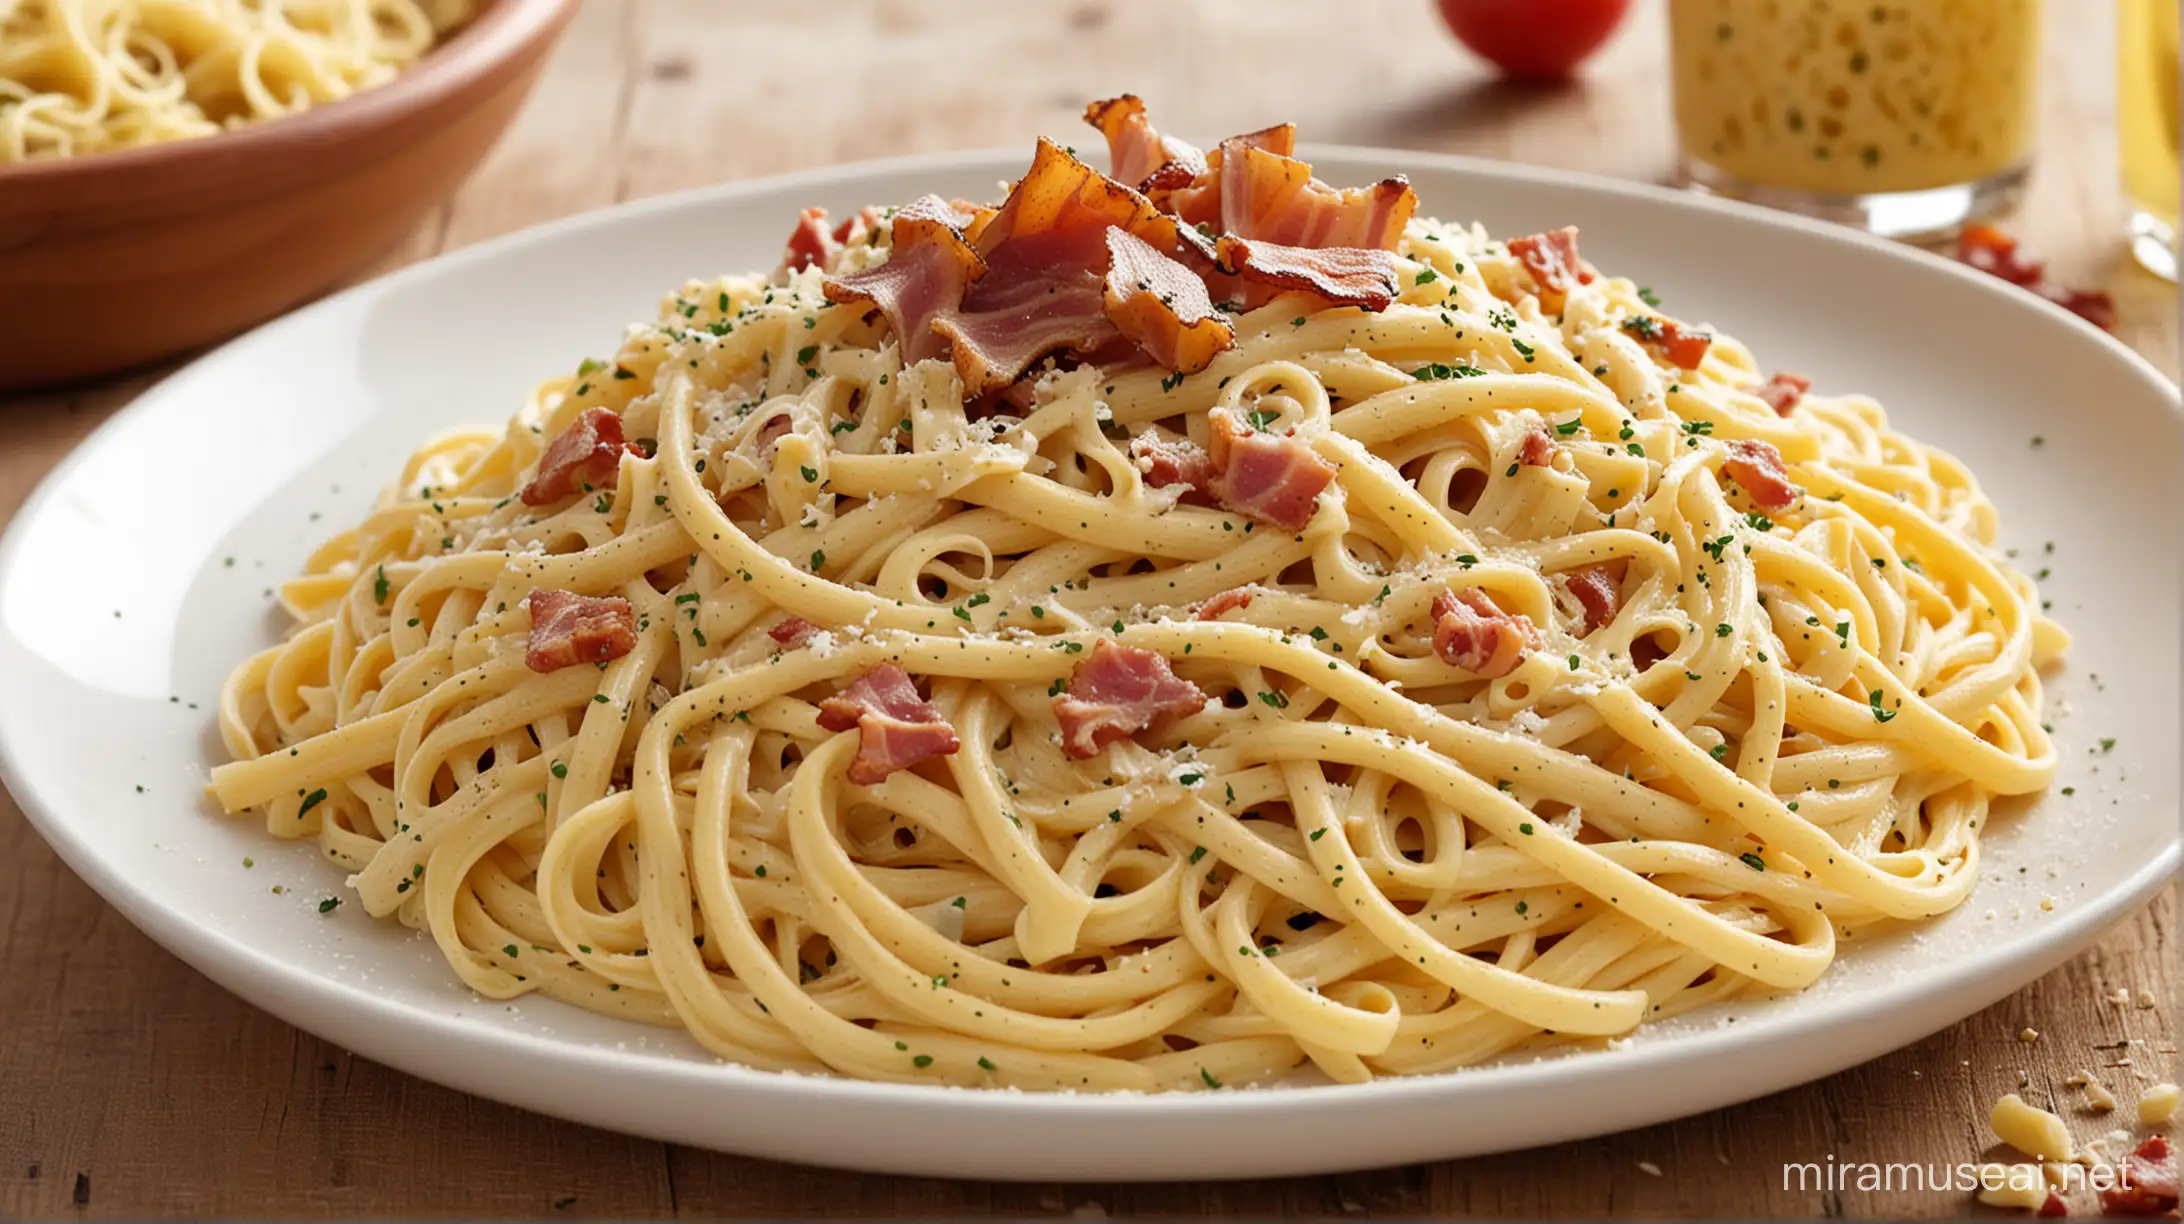 Italian Pasta Carbonara: Al dente spaghetti with a rich cream cheese sauce and bacon bits, appetizing with its creamy taste and generous texture.